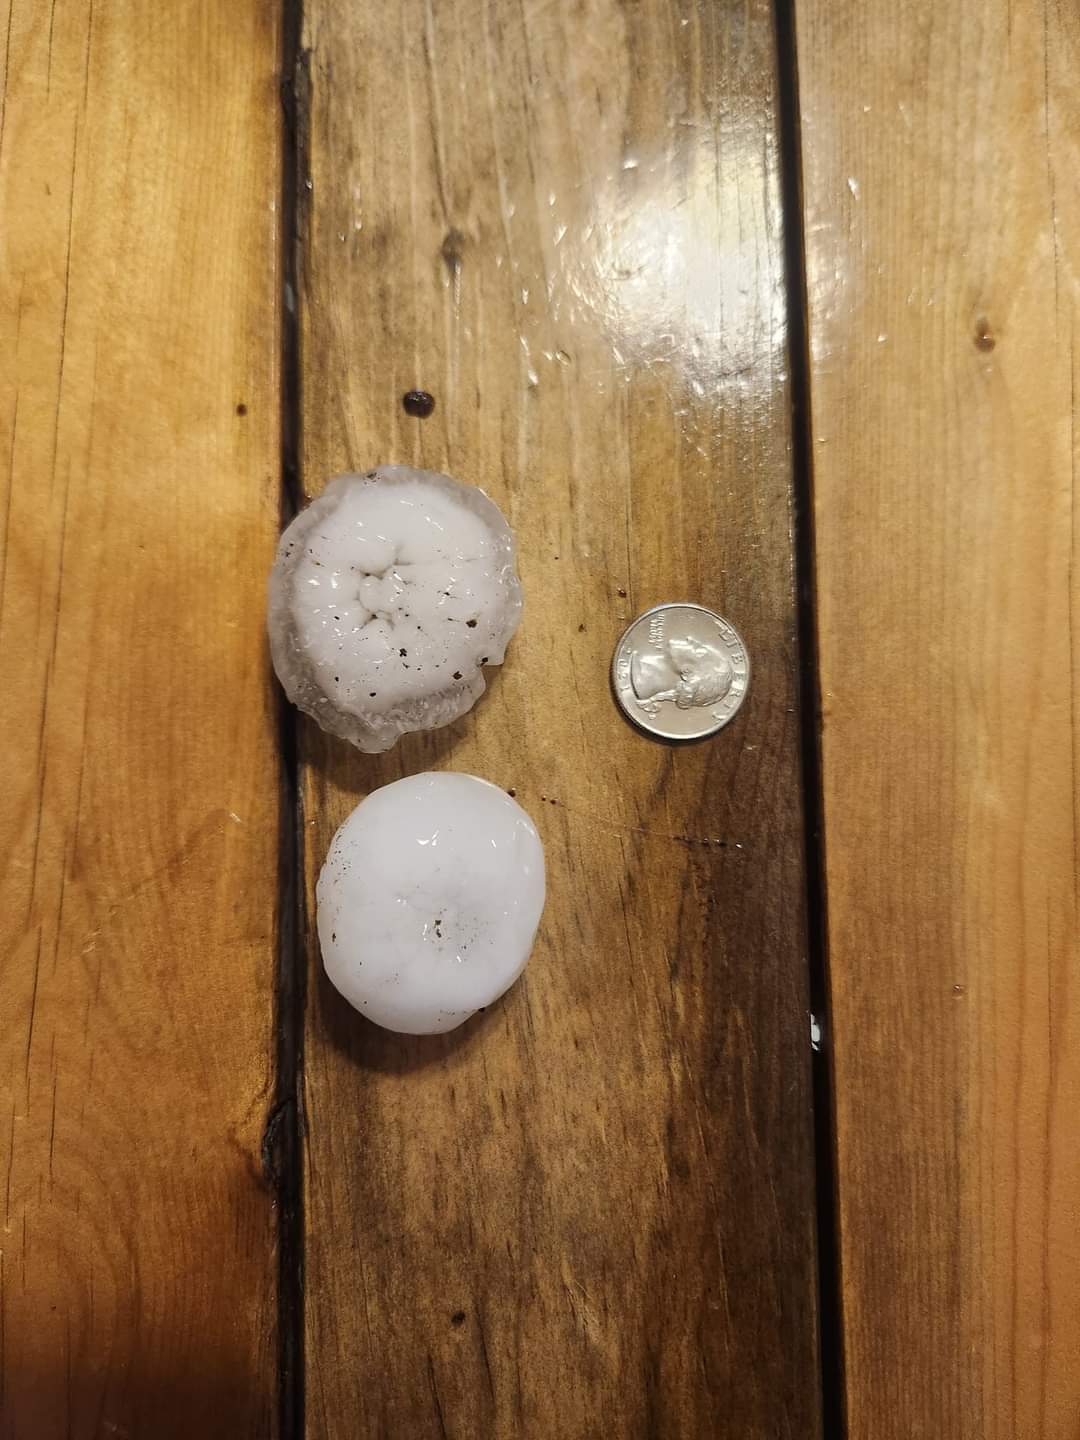 Large hail measured to be approximately 2 inches in diameter from Laddonia, MO